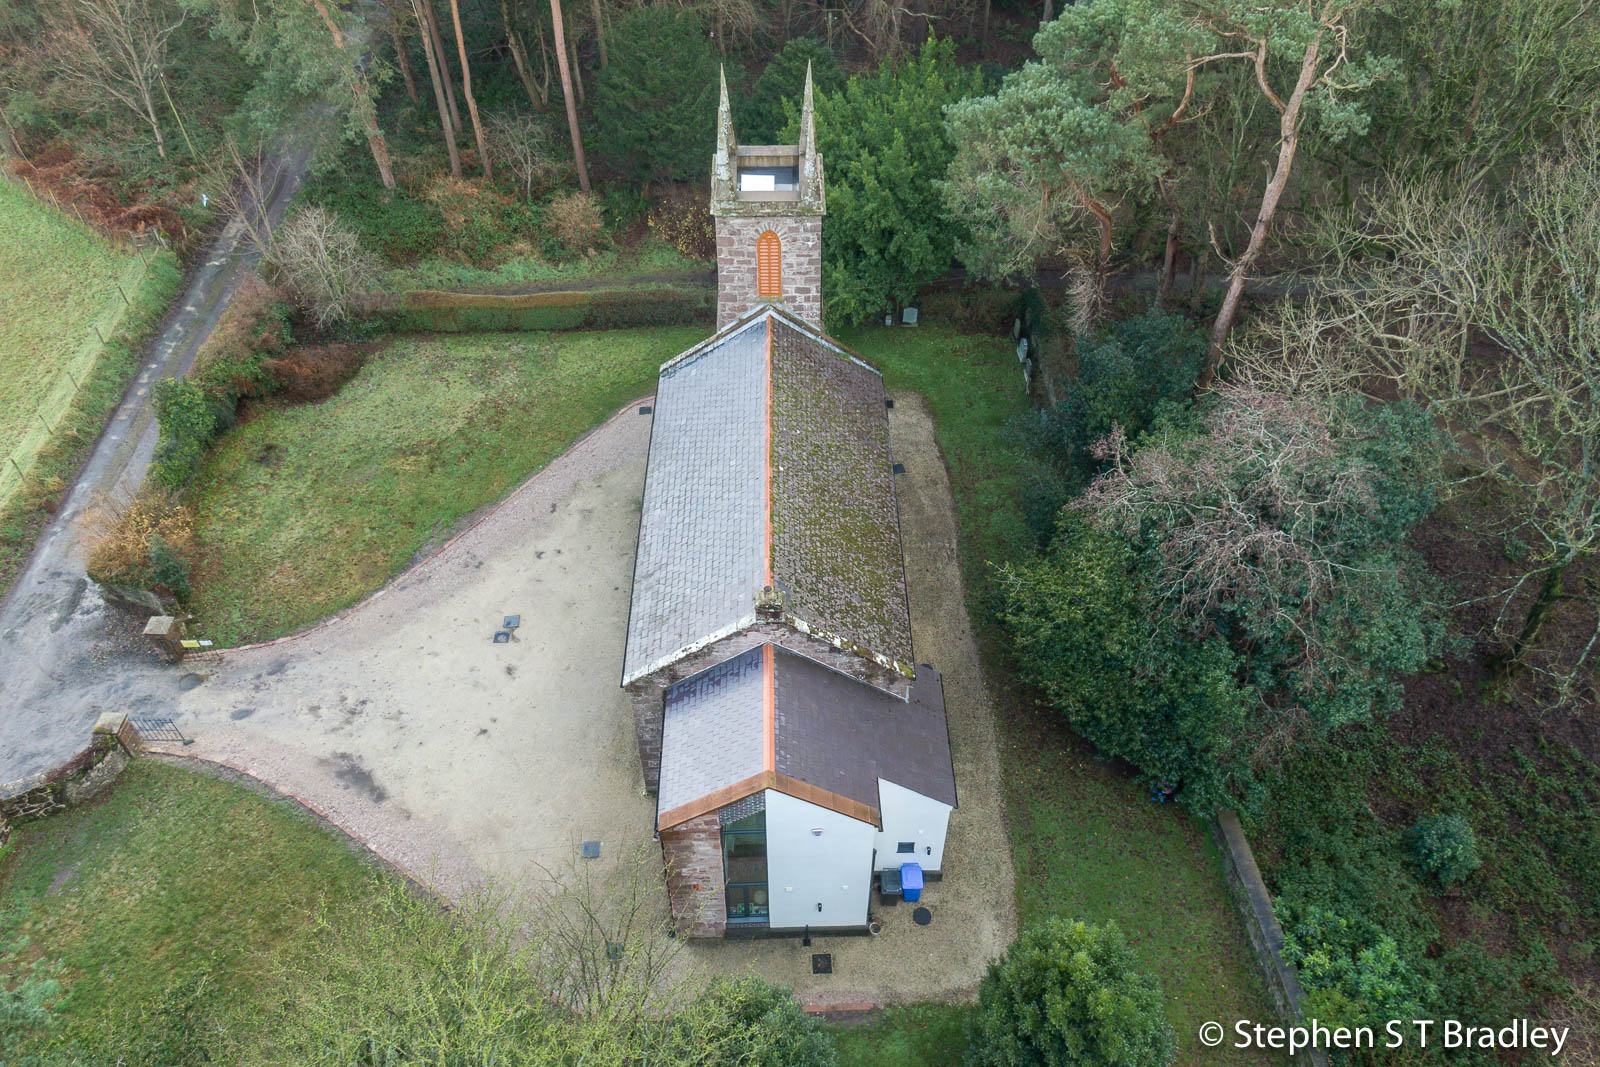 Aerial drone photography and video production services Dublin and Ireland portfolio - The Old Church Centre, Cushendun, aerial photo 0001-6